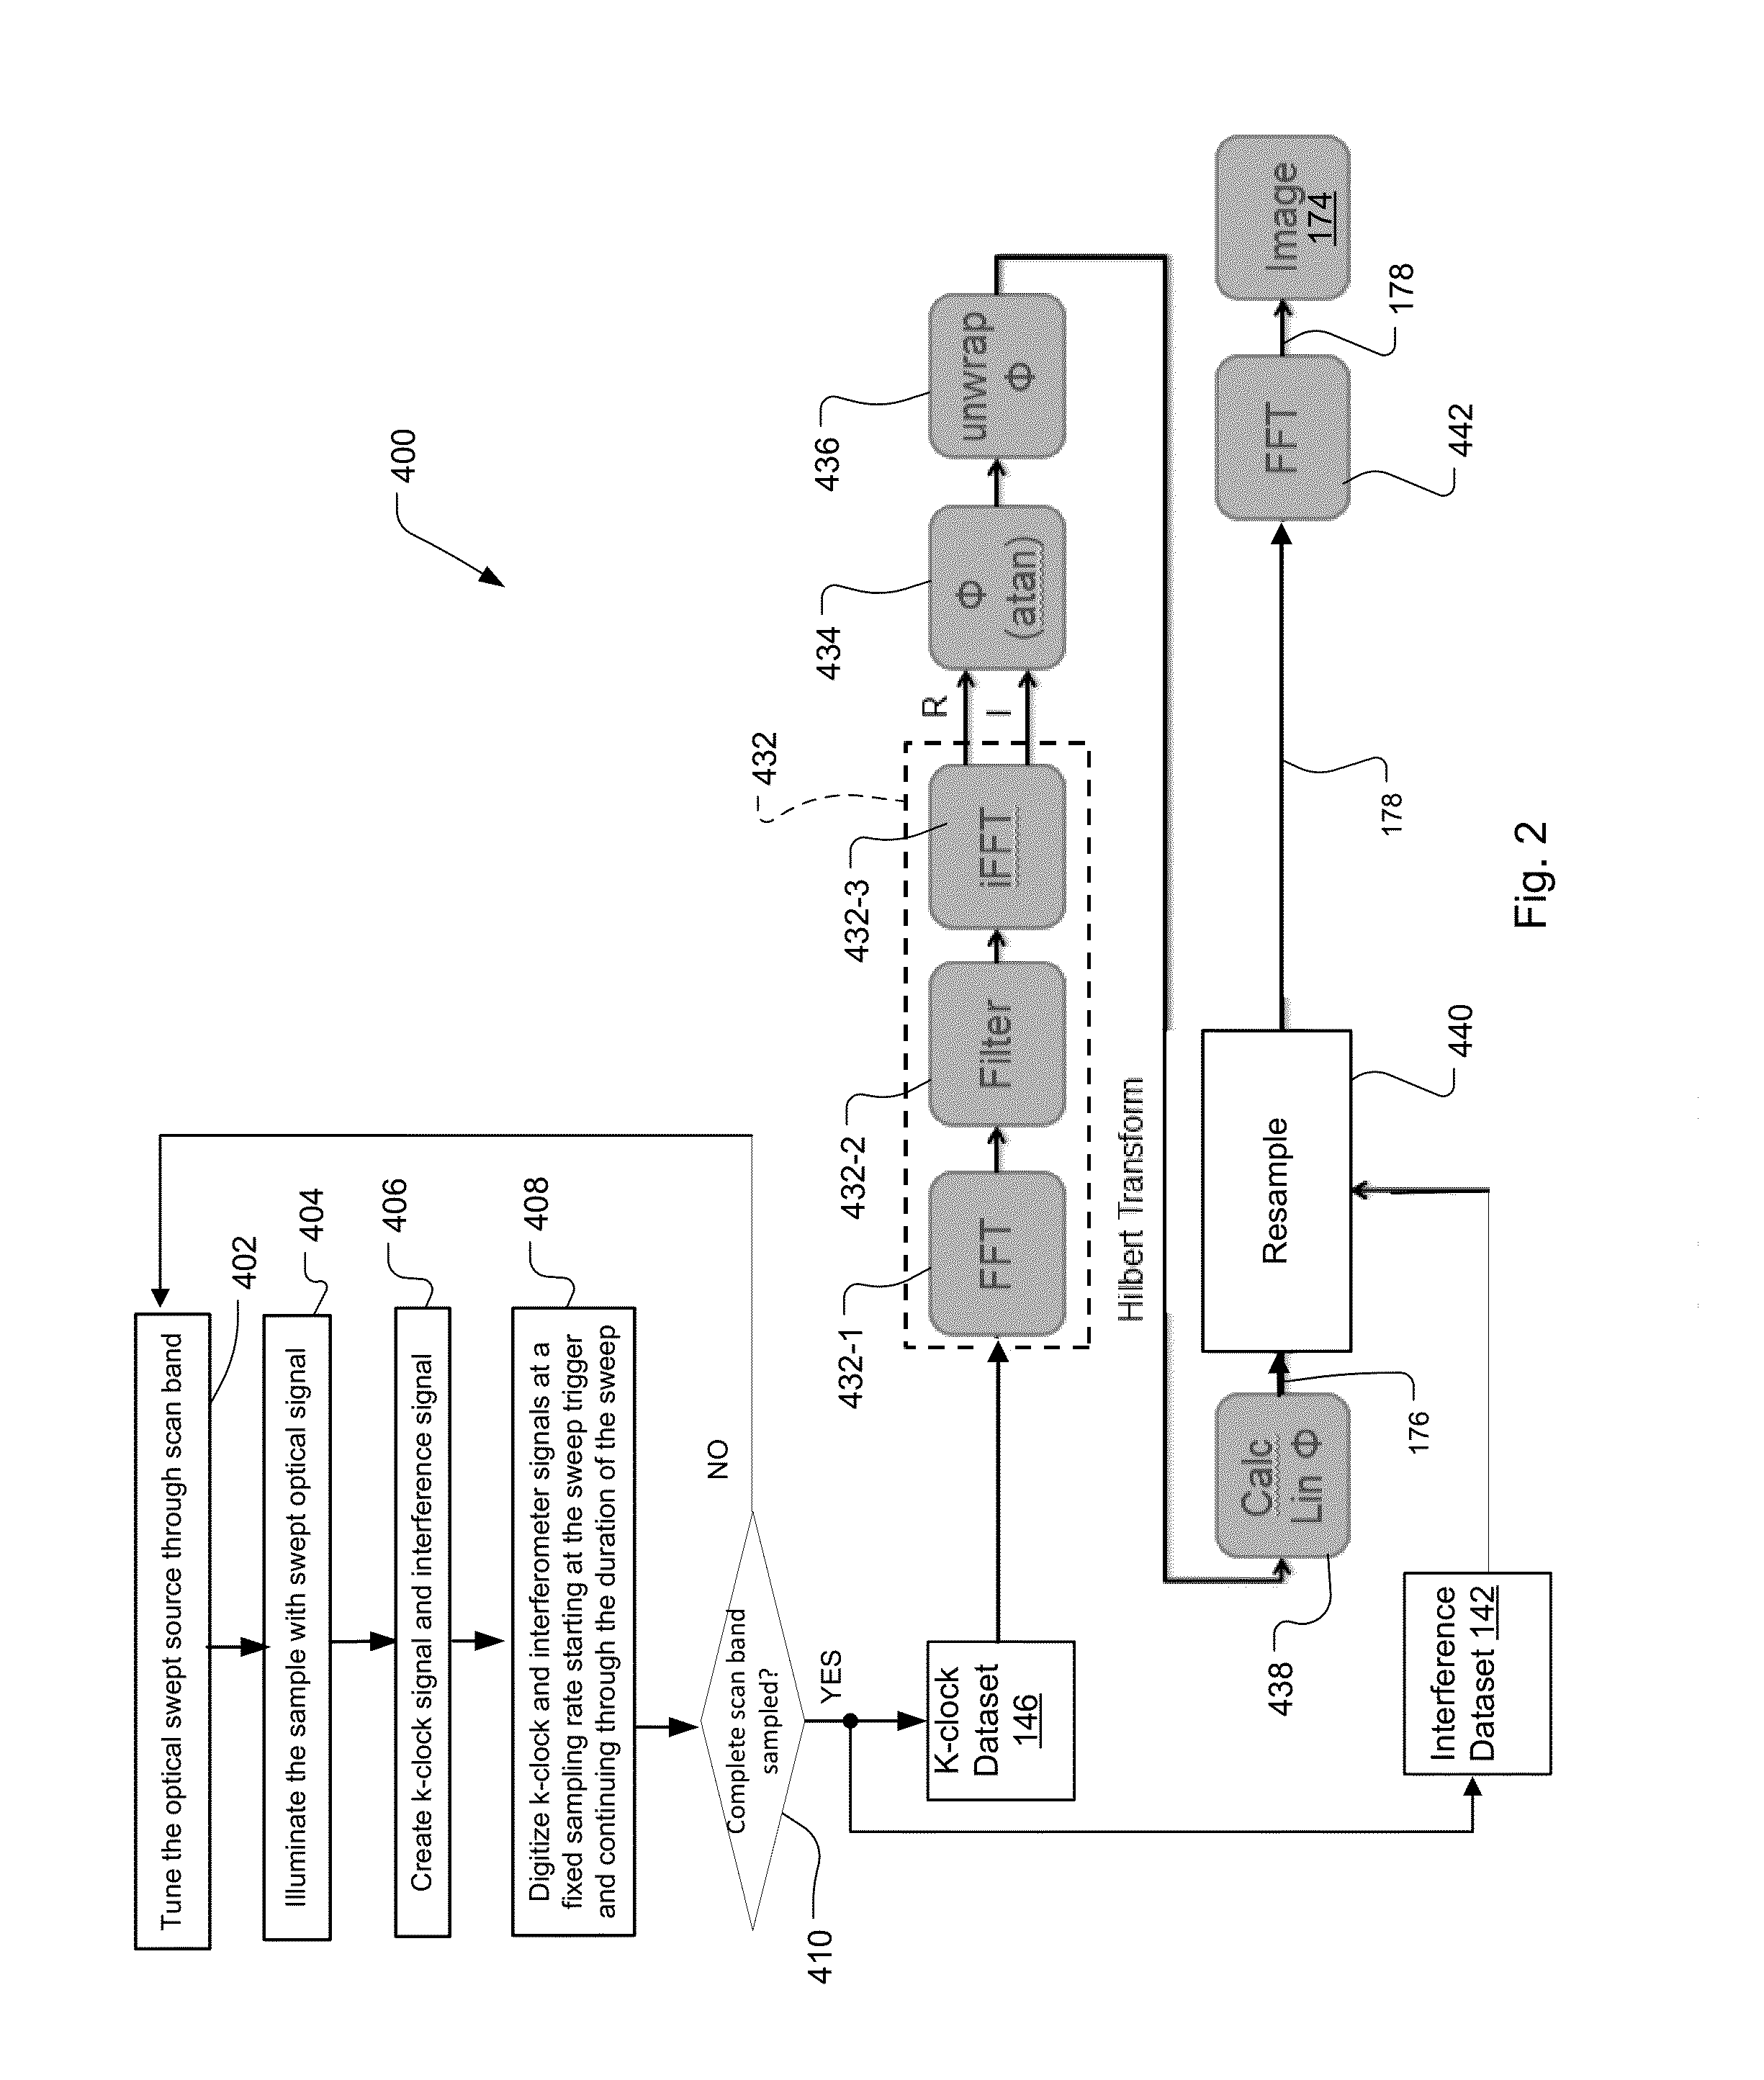 Spectral filtering of k-clock signal in OCT system and method